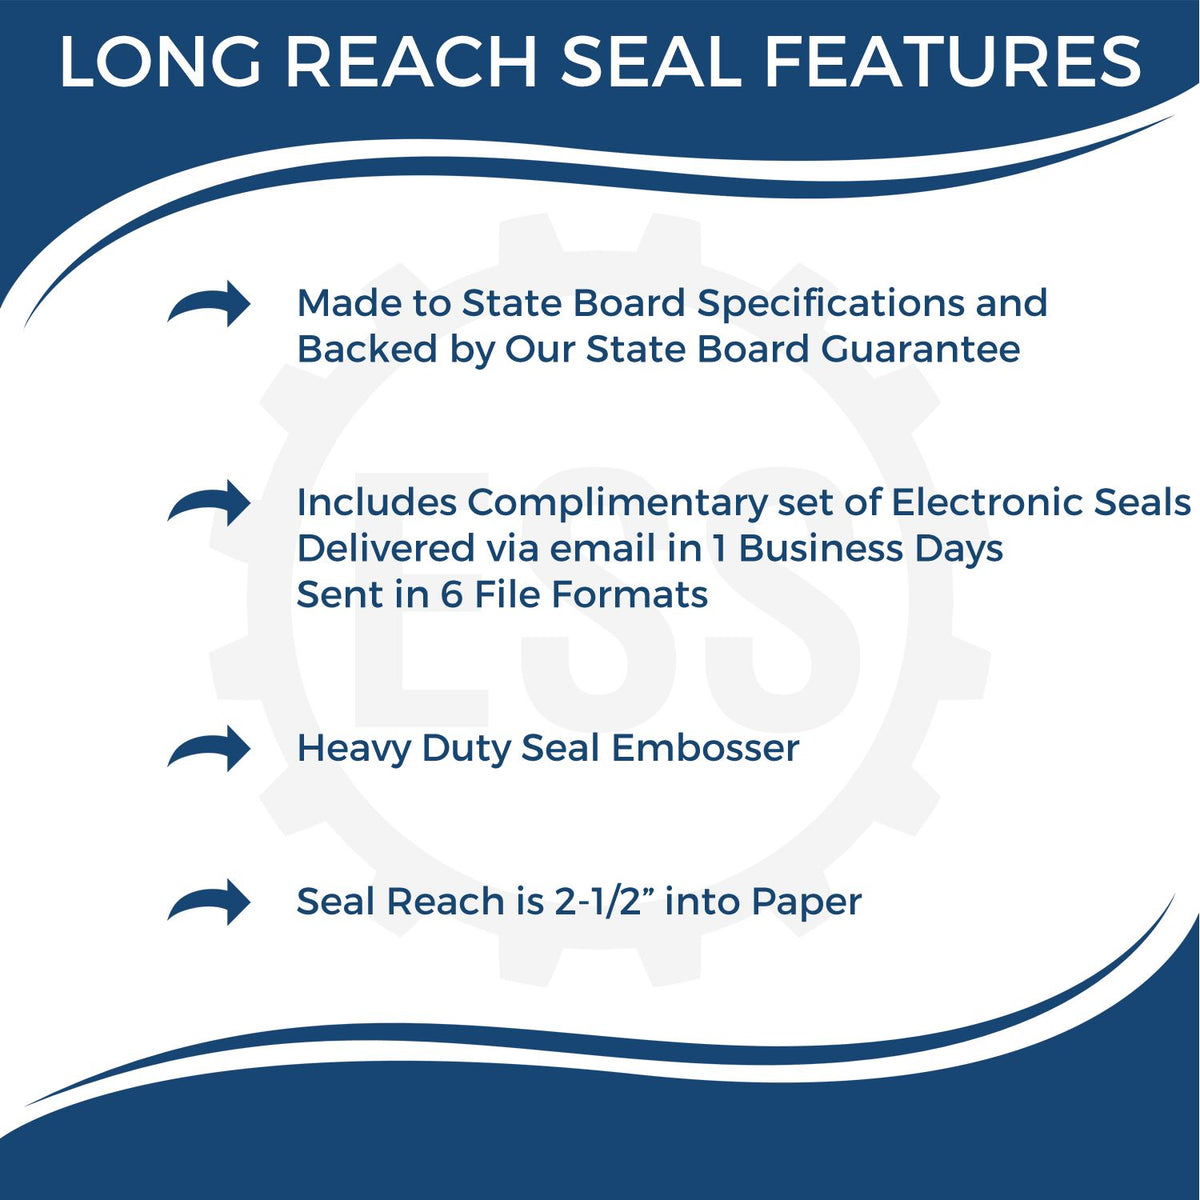 A picture of an infographic highlighting the selling points for the Long Reach Arkansas Geology Seal